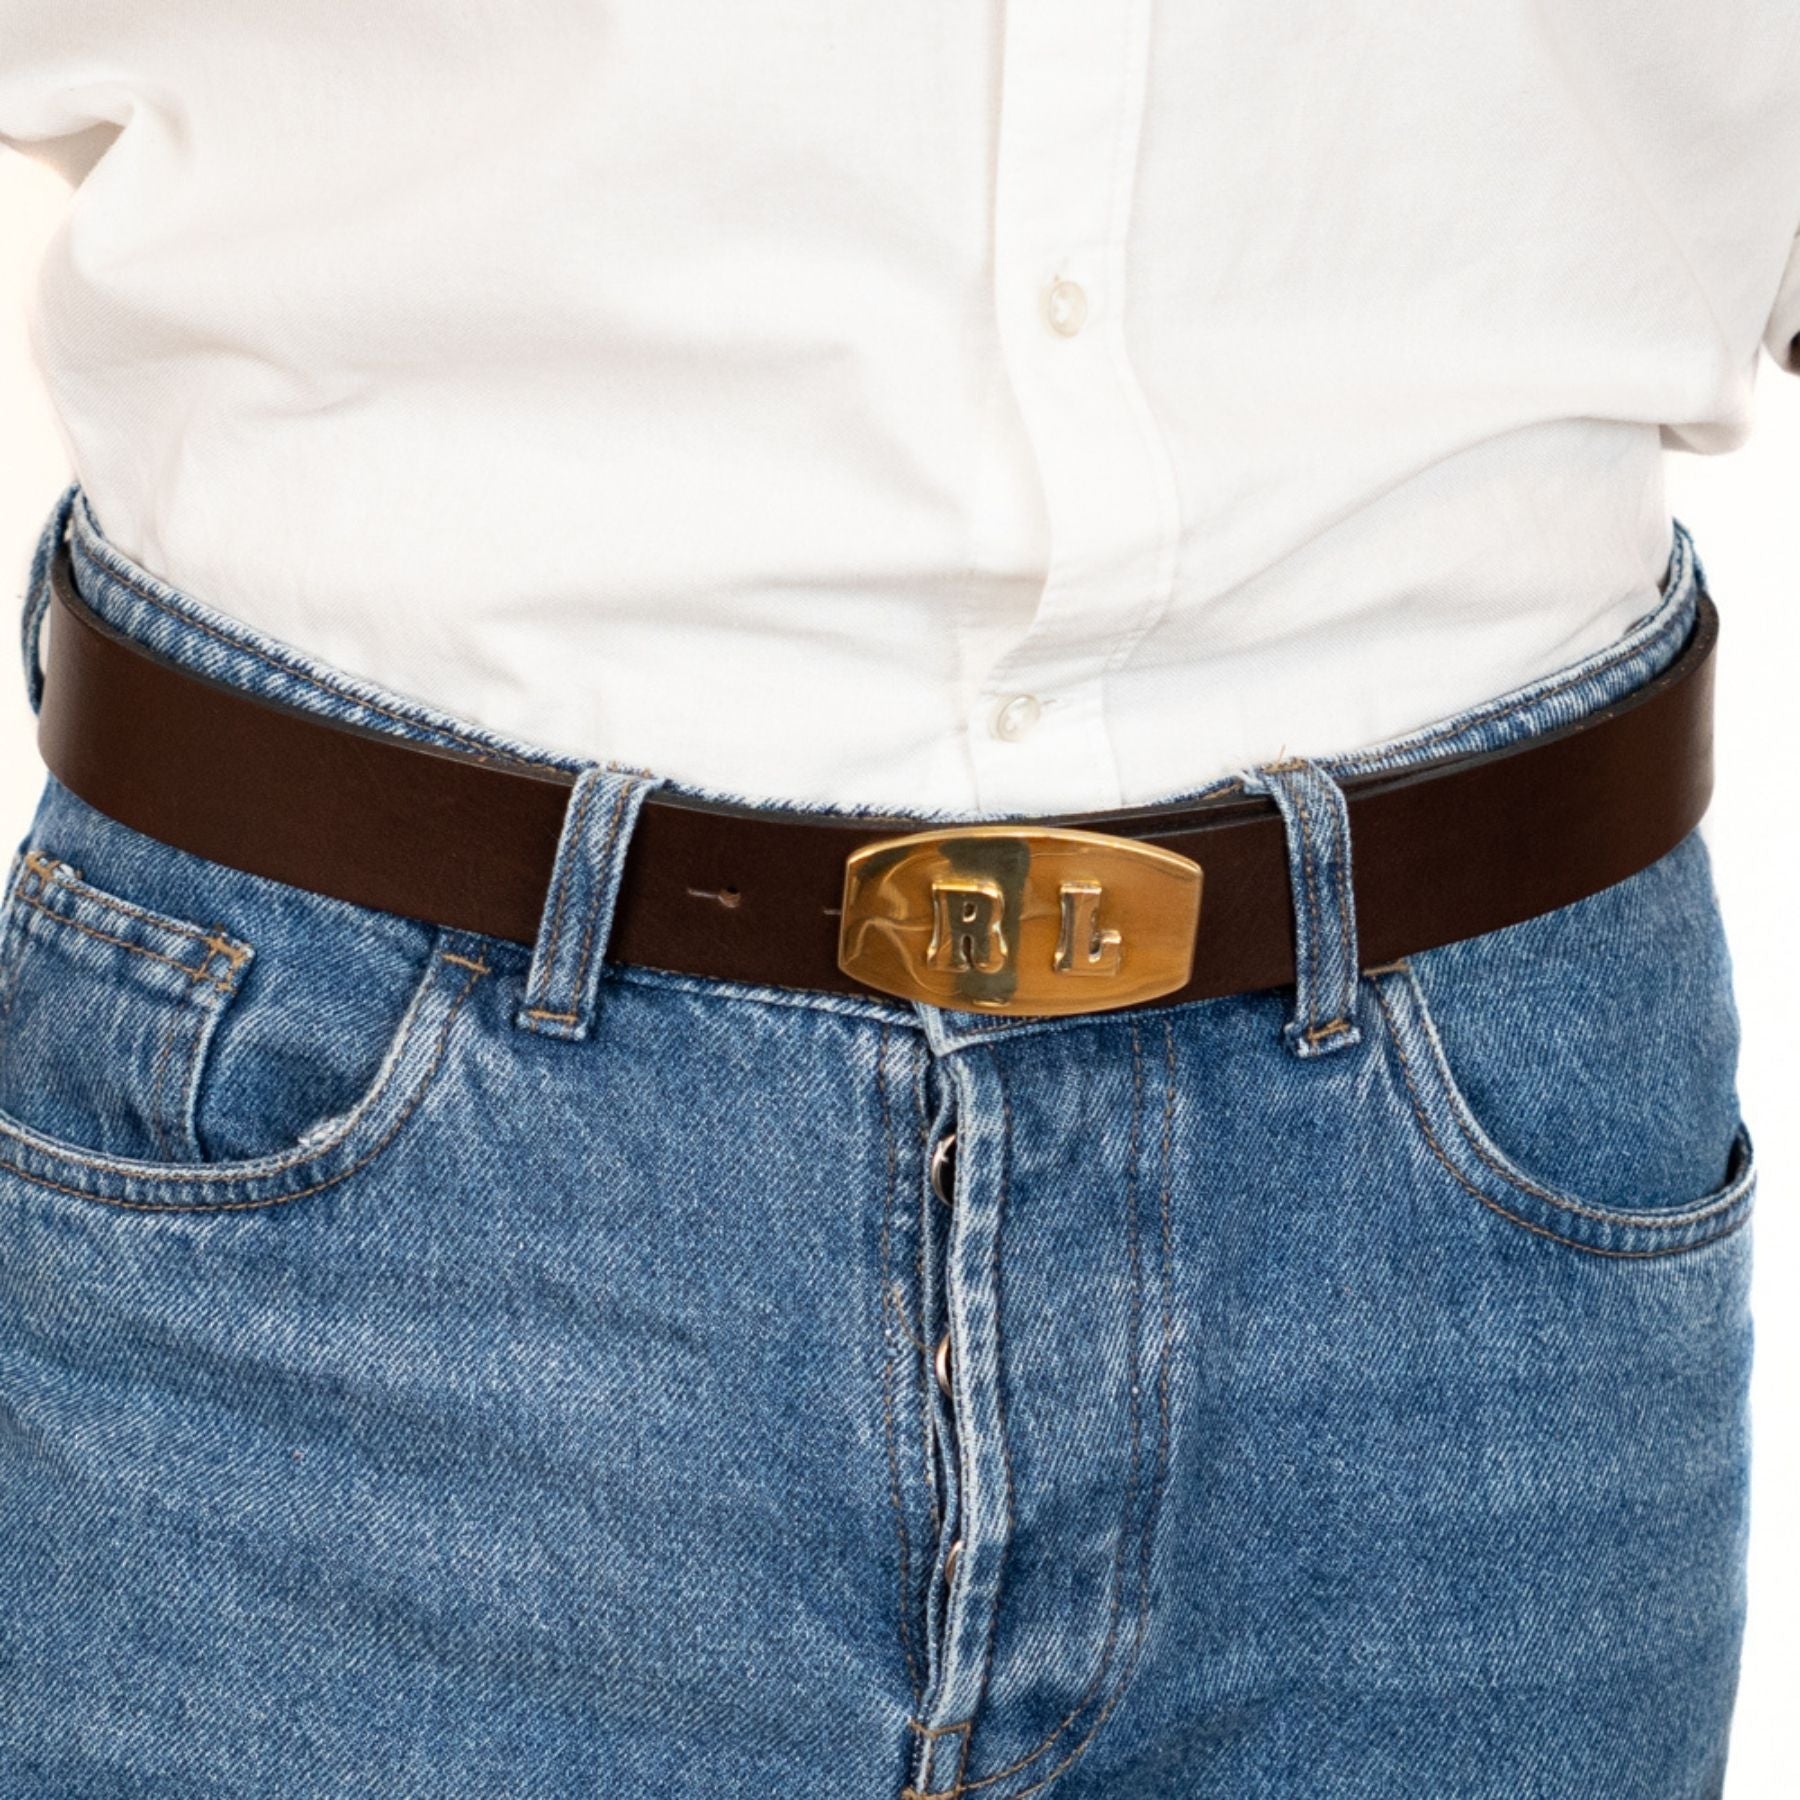 Gaucholife Belts Brown / 30 Personalized Leather Buckle Belt